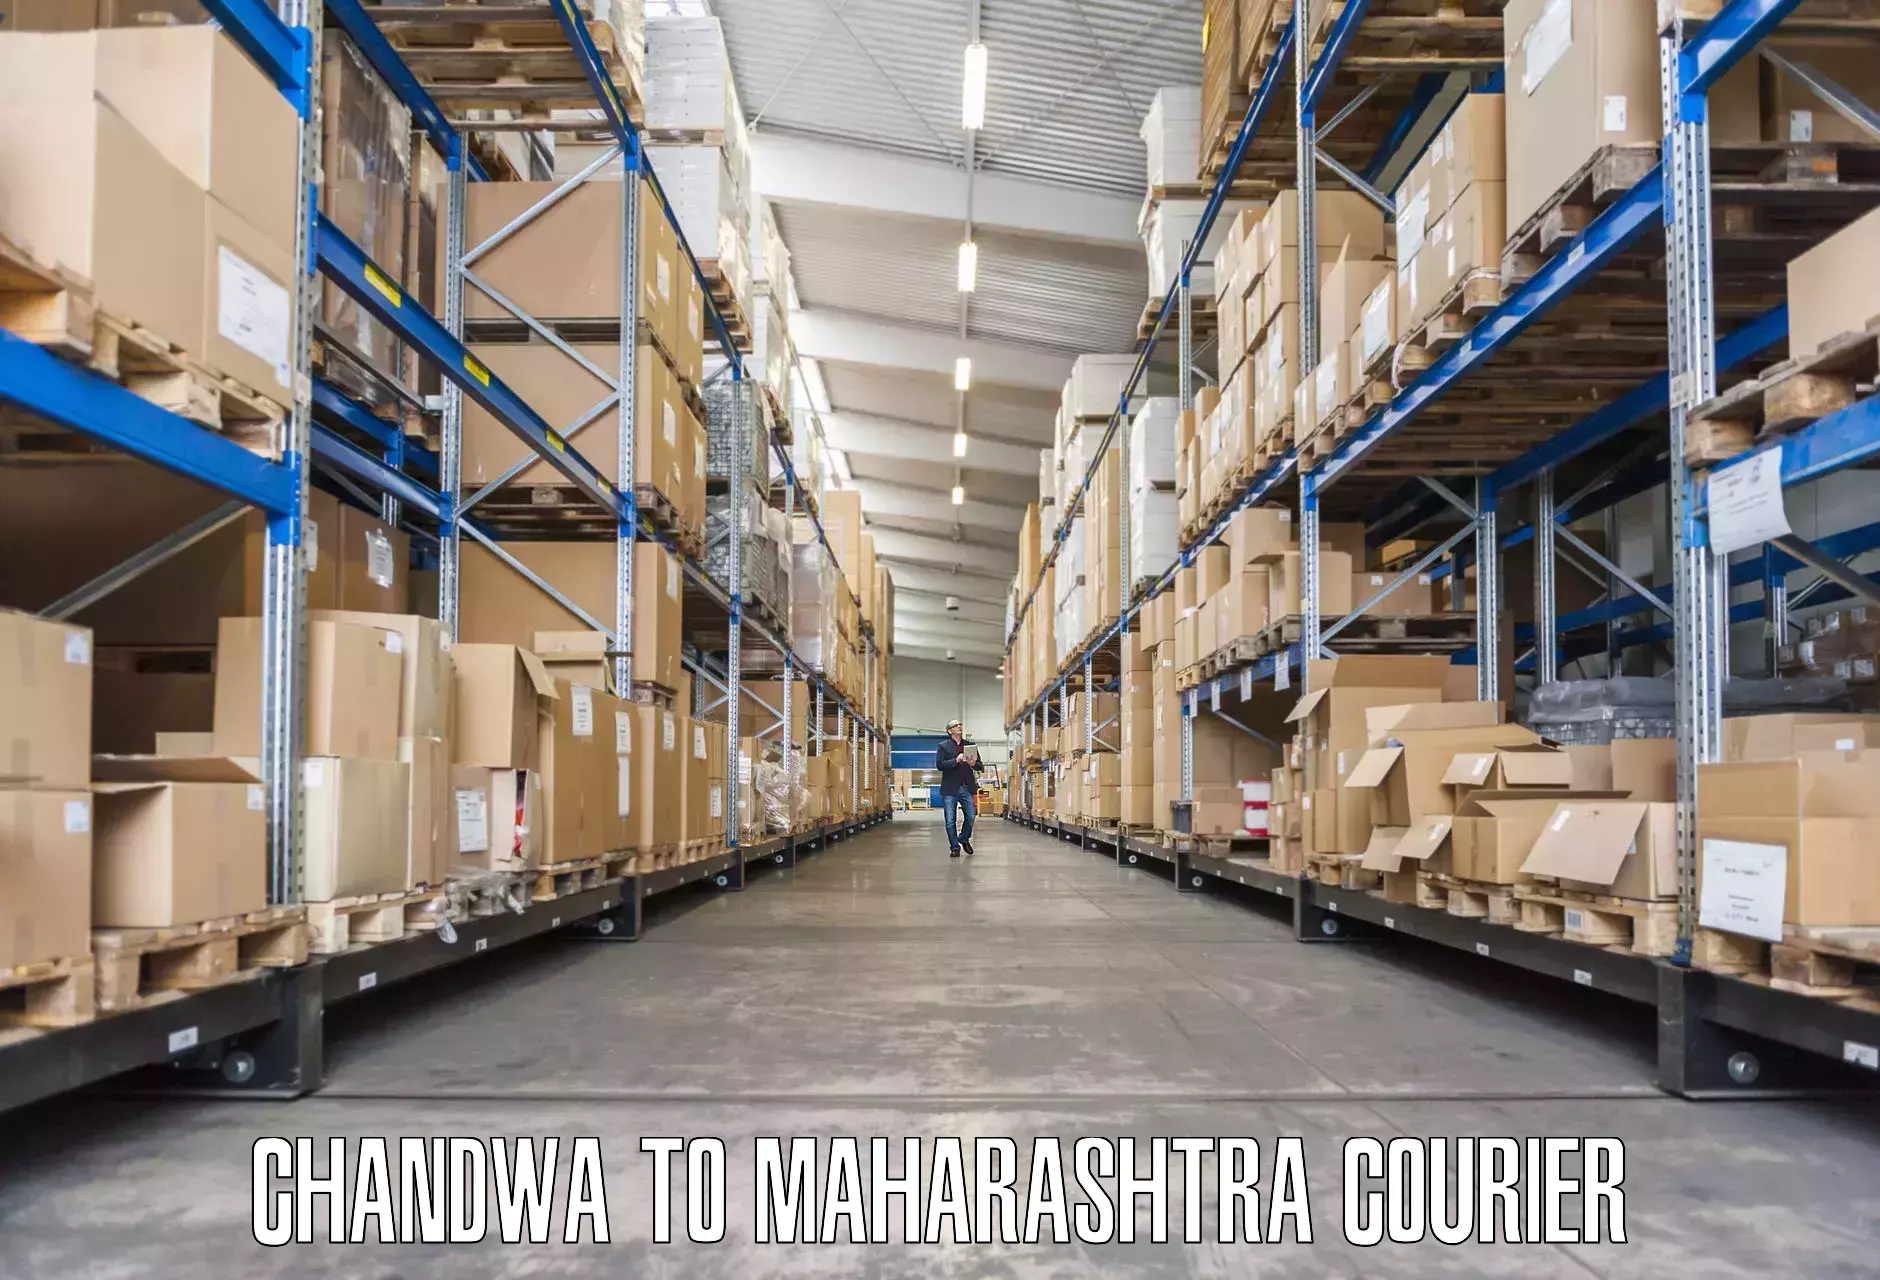 Specialized moving company Chandwa to Dhamangaon